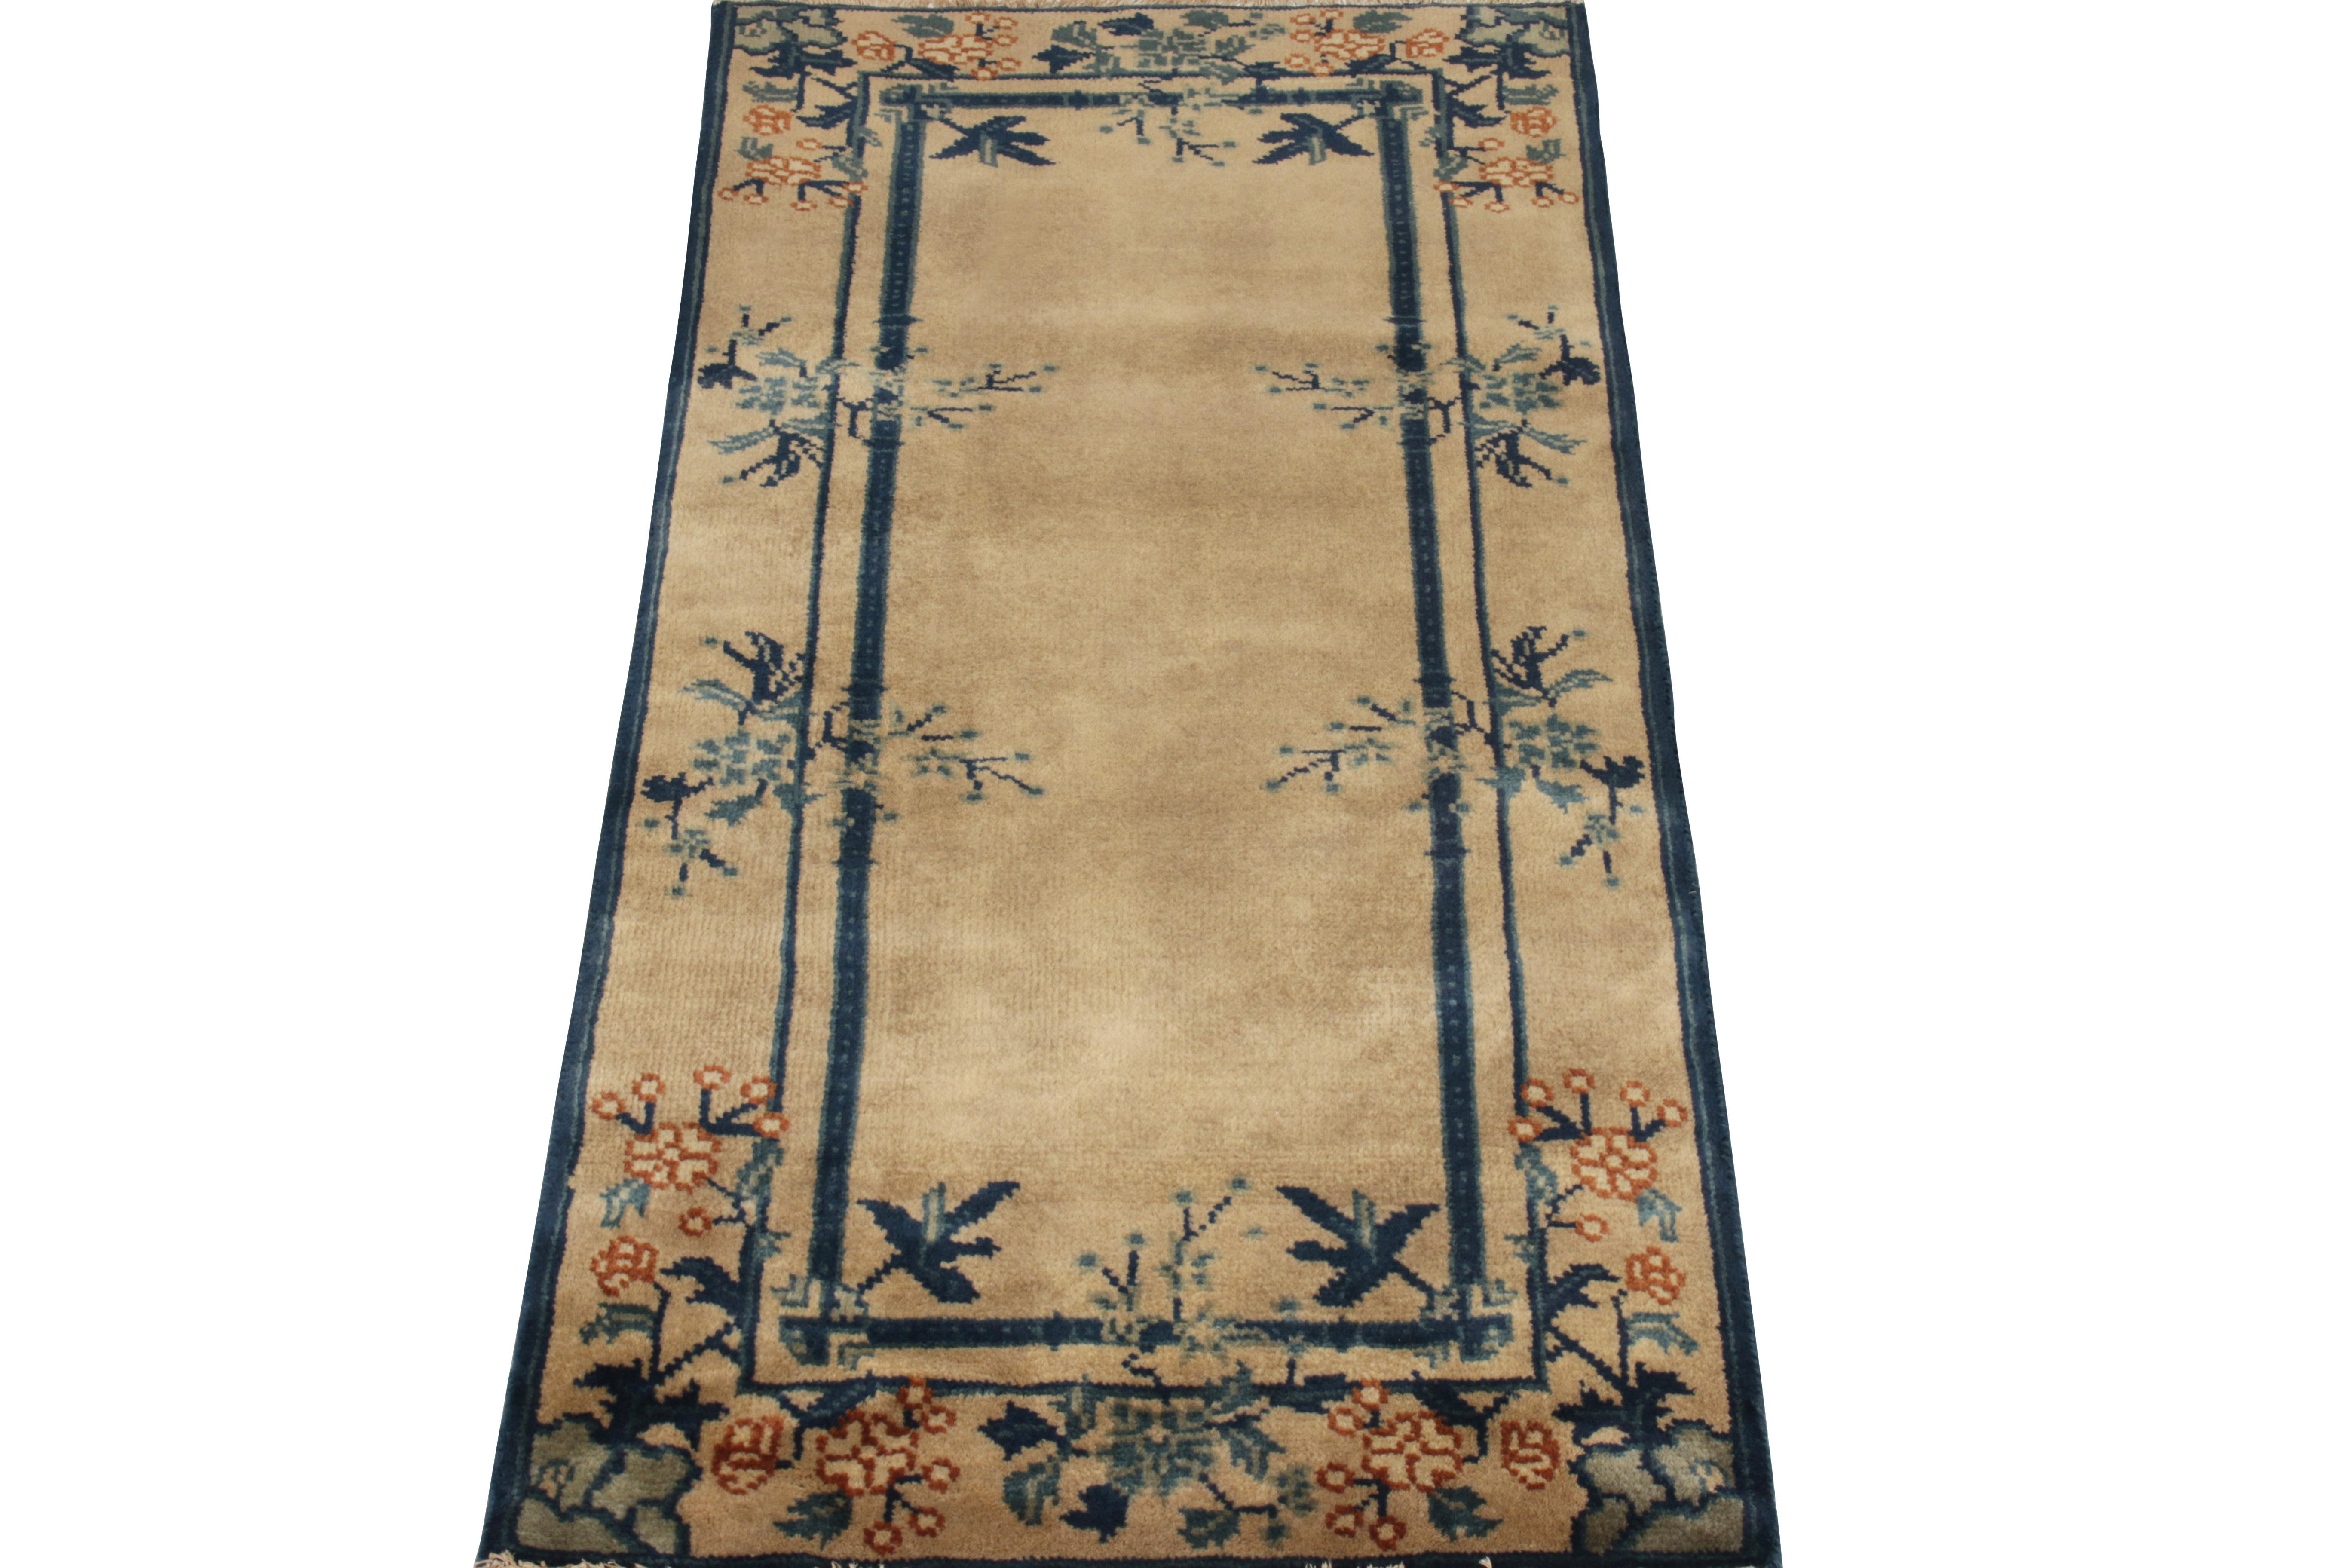 Belonging to Rug & Kilim’s Antique & Vintage Collection, a 2 x 4 vintage ode to Chinese Deco styles of the 1920s exemplifying classic frames in royal blue atop a luxurious beige-brown backdrop comfortably supporting the florals in aegean blue, teal